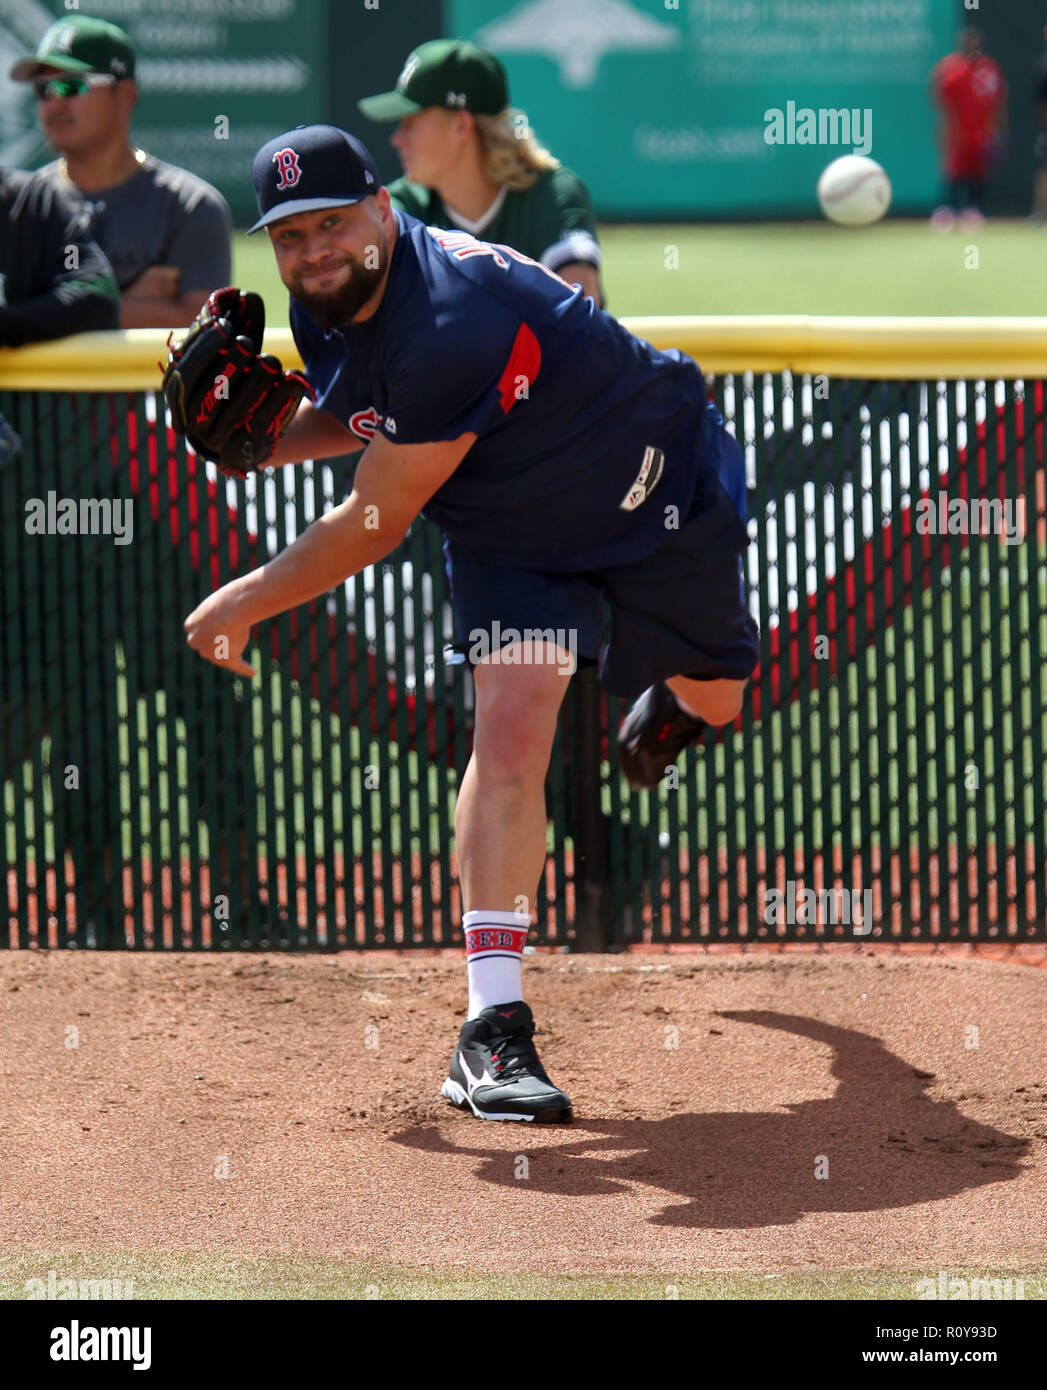 November 4, 2018 - Boston Red Sox Brian Johnson during a warm up workout session at Les Murakami Stadium on the campus of the University of Hawaii at Manoa in Honolulu, HI - Michael Sullivan/CSM Stock Photo